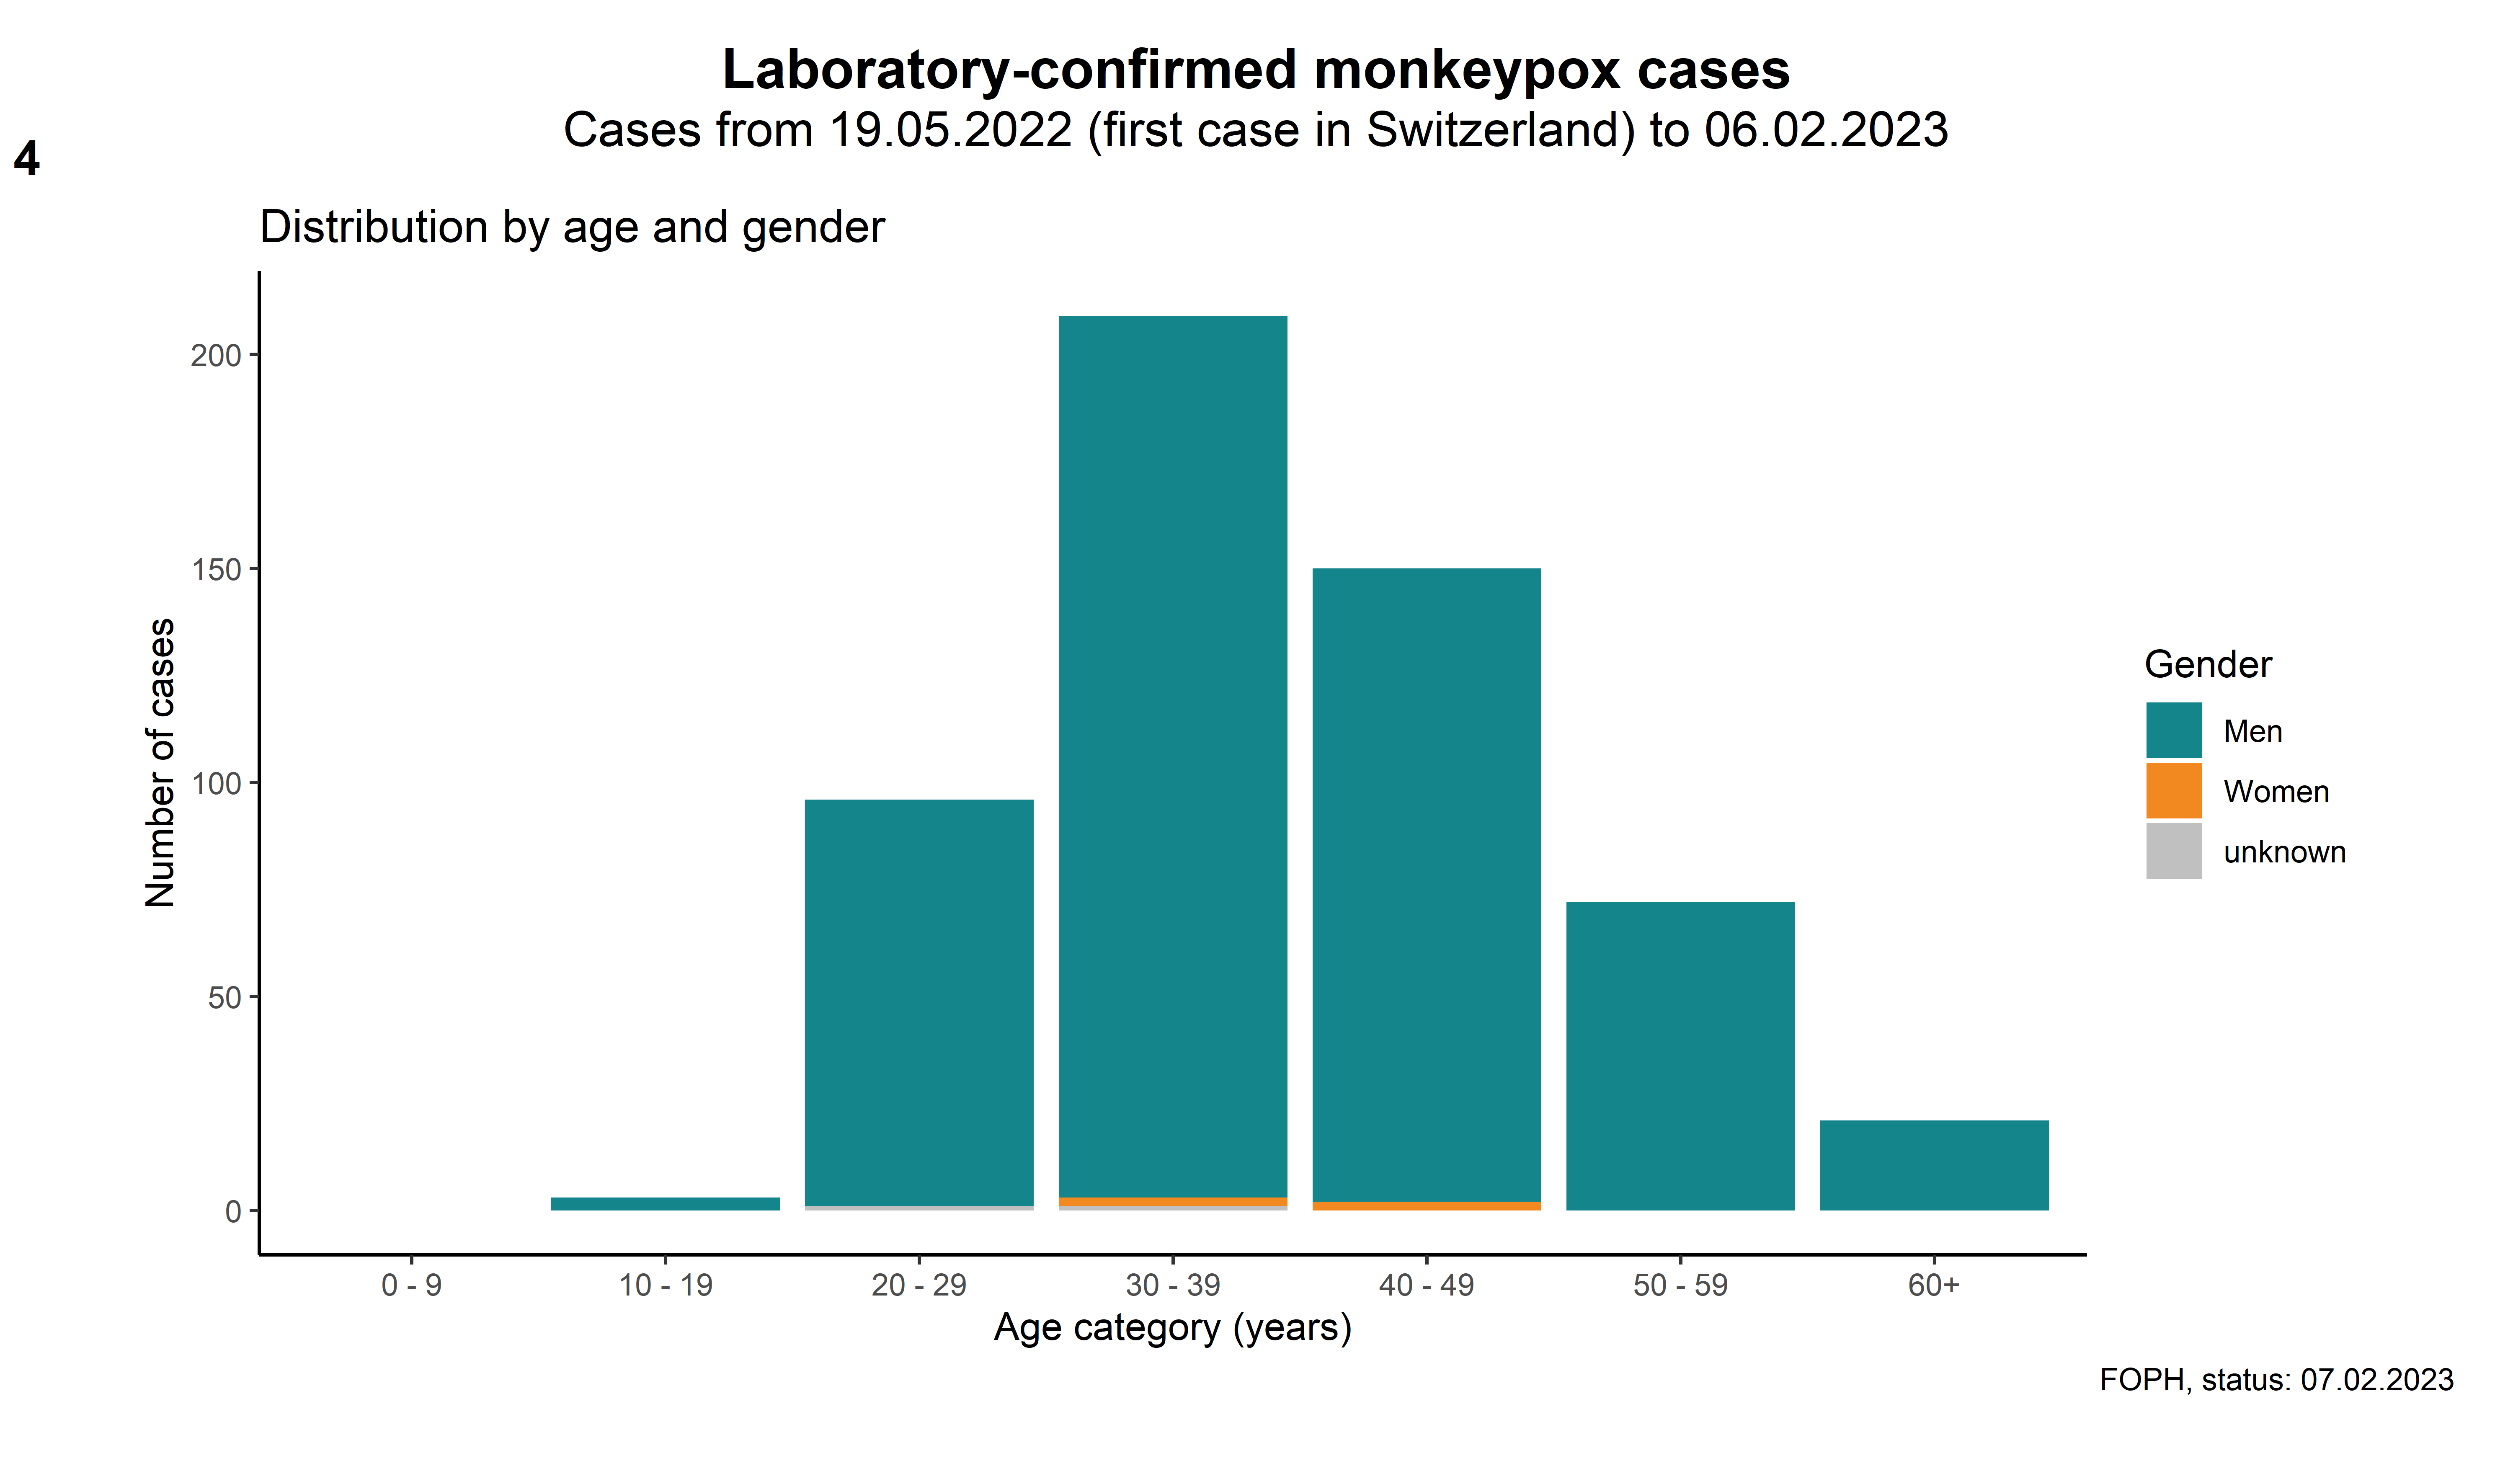 Figure 4: Laboratory-confirmed monkeypox cases in Switzerland by age and sex (related data in the Excel table)